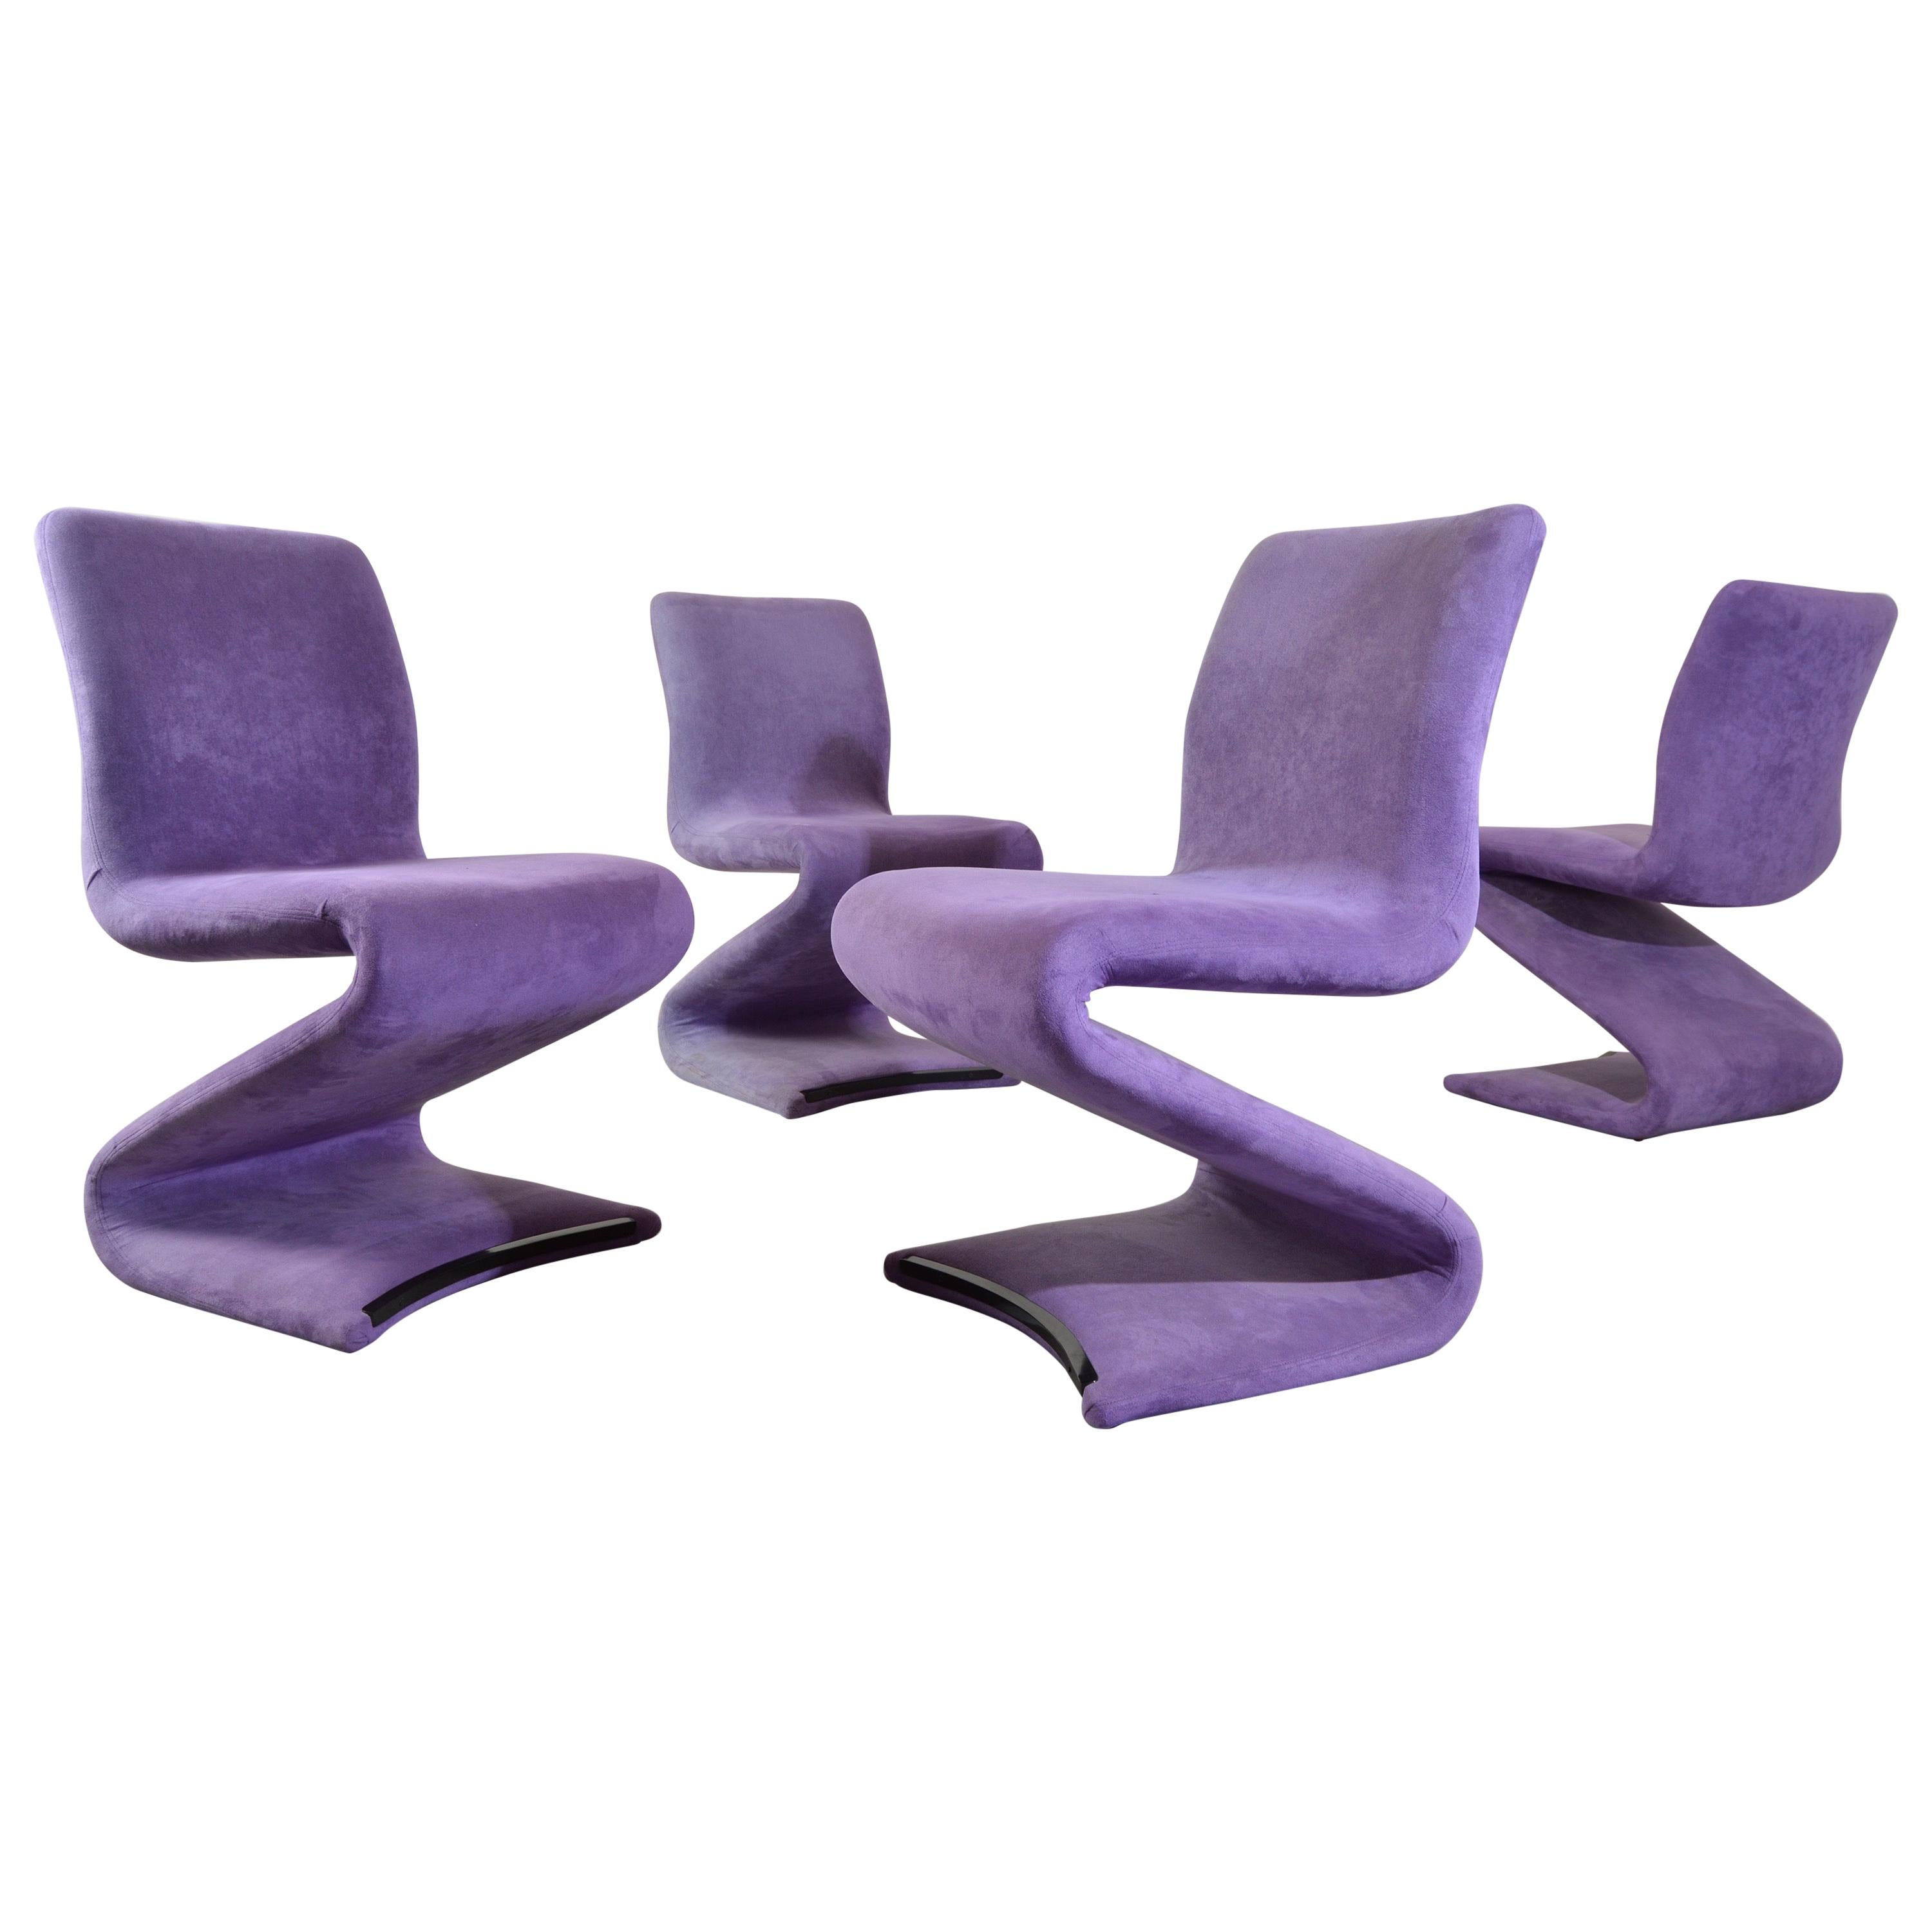 Set of 4 S Form Dining Chairs in Ultrasuede Attributed to Verner Panton